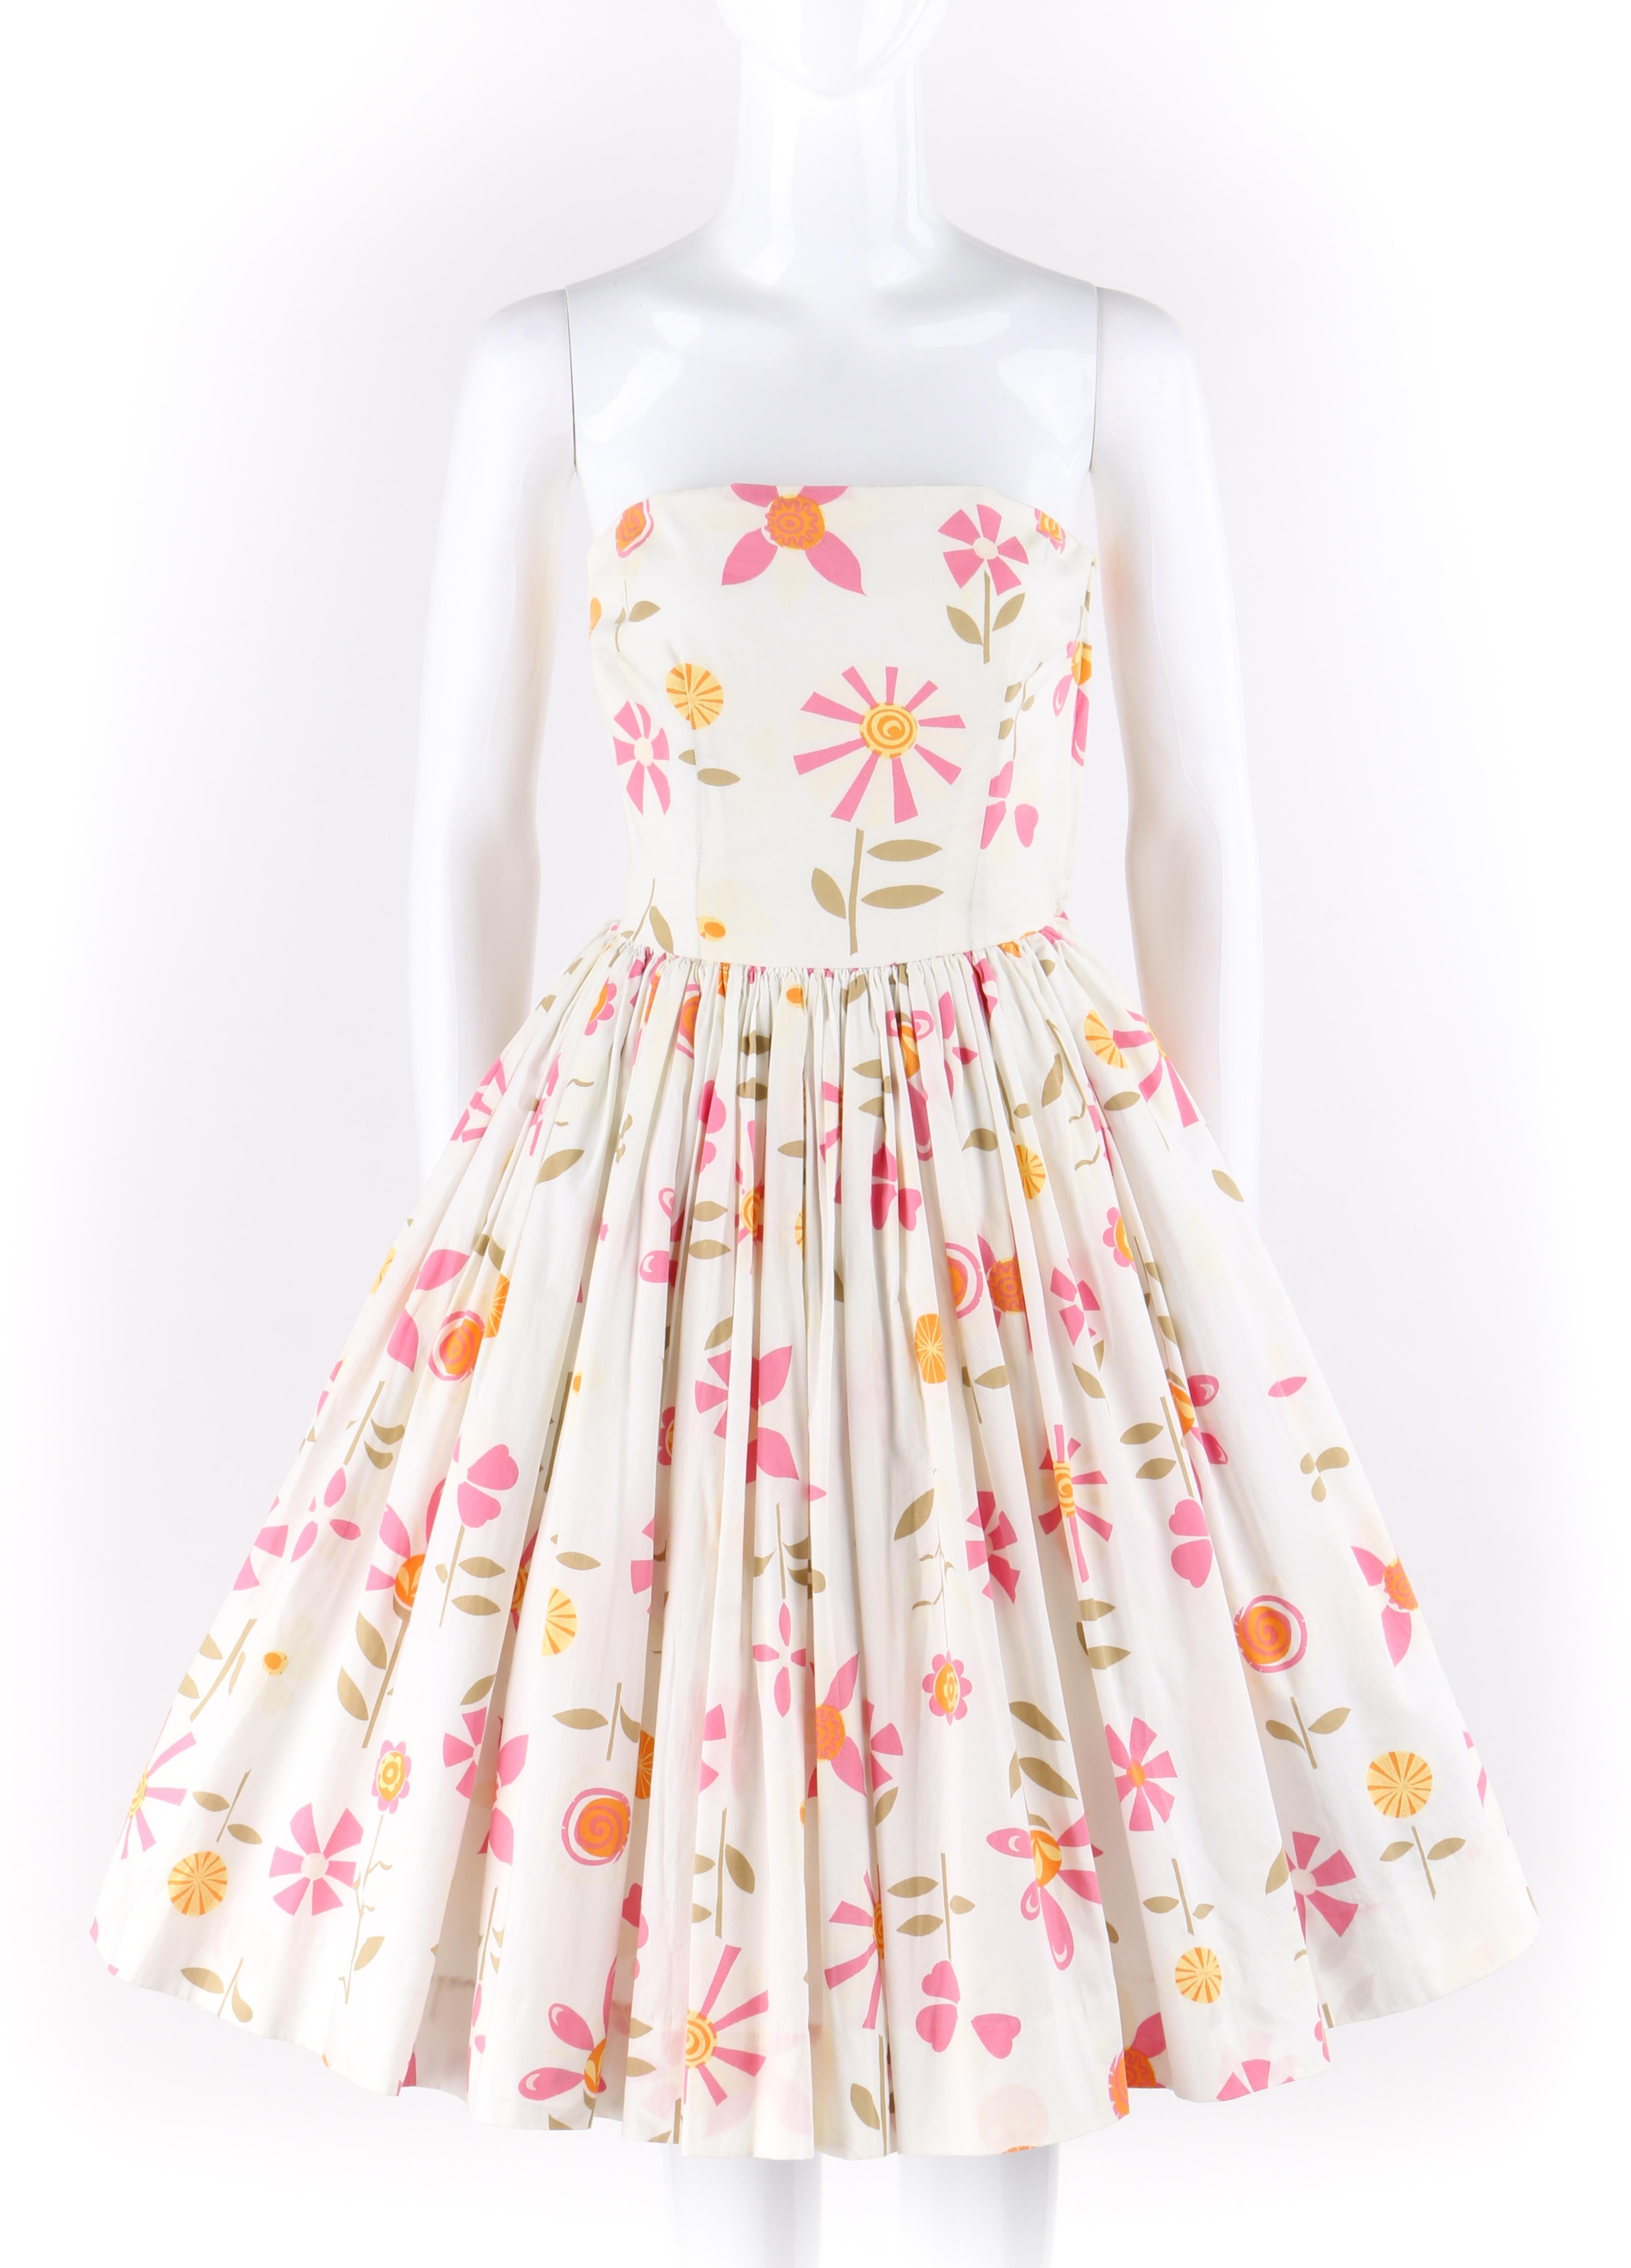 COUTURE c.1950's Fit & Flare Circle Skirt Floral Strapless Day Party Dress 
 
Brand / Manufacturer: no label couture made one of a kind
Circa: 1950's
Style: Strapless dress
Color(s): Shades of white, yellow, orange, green, and pink
Lined: